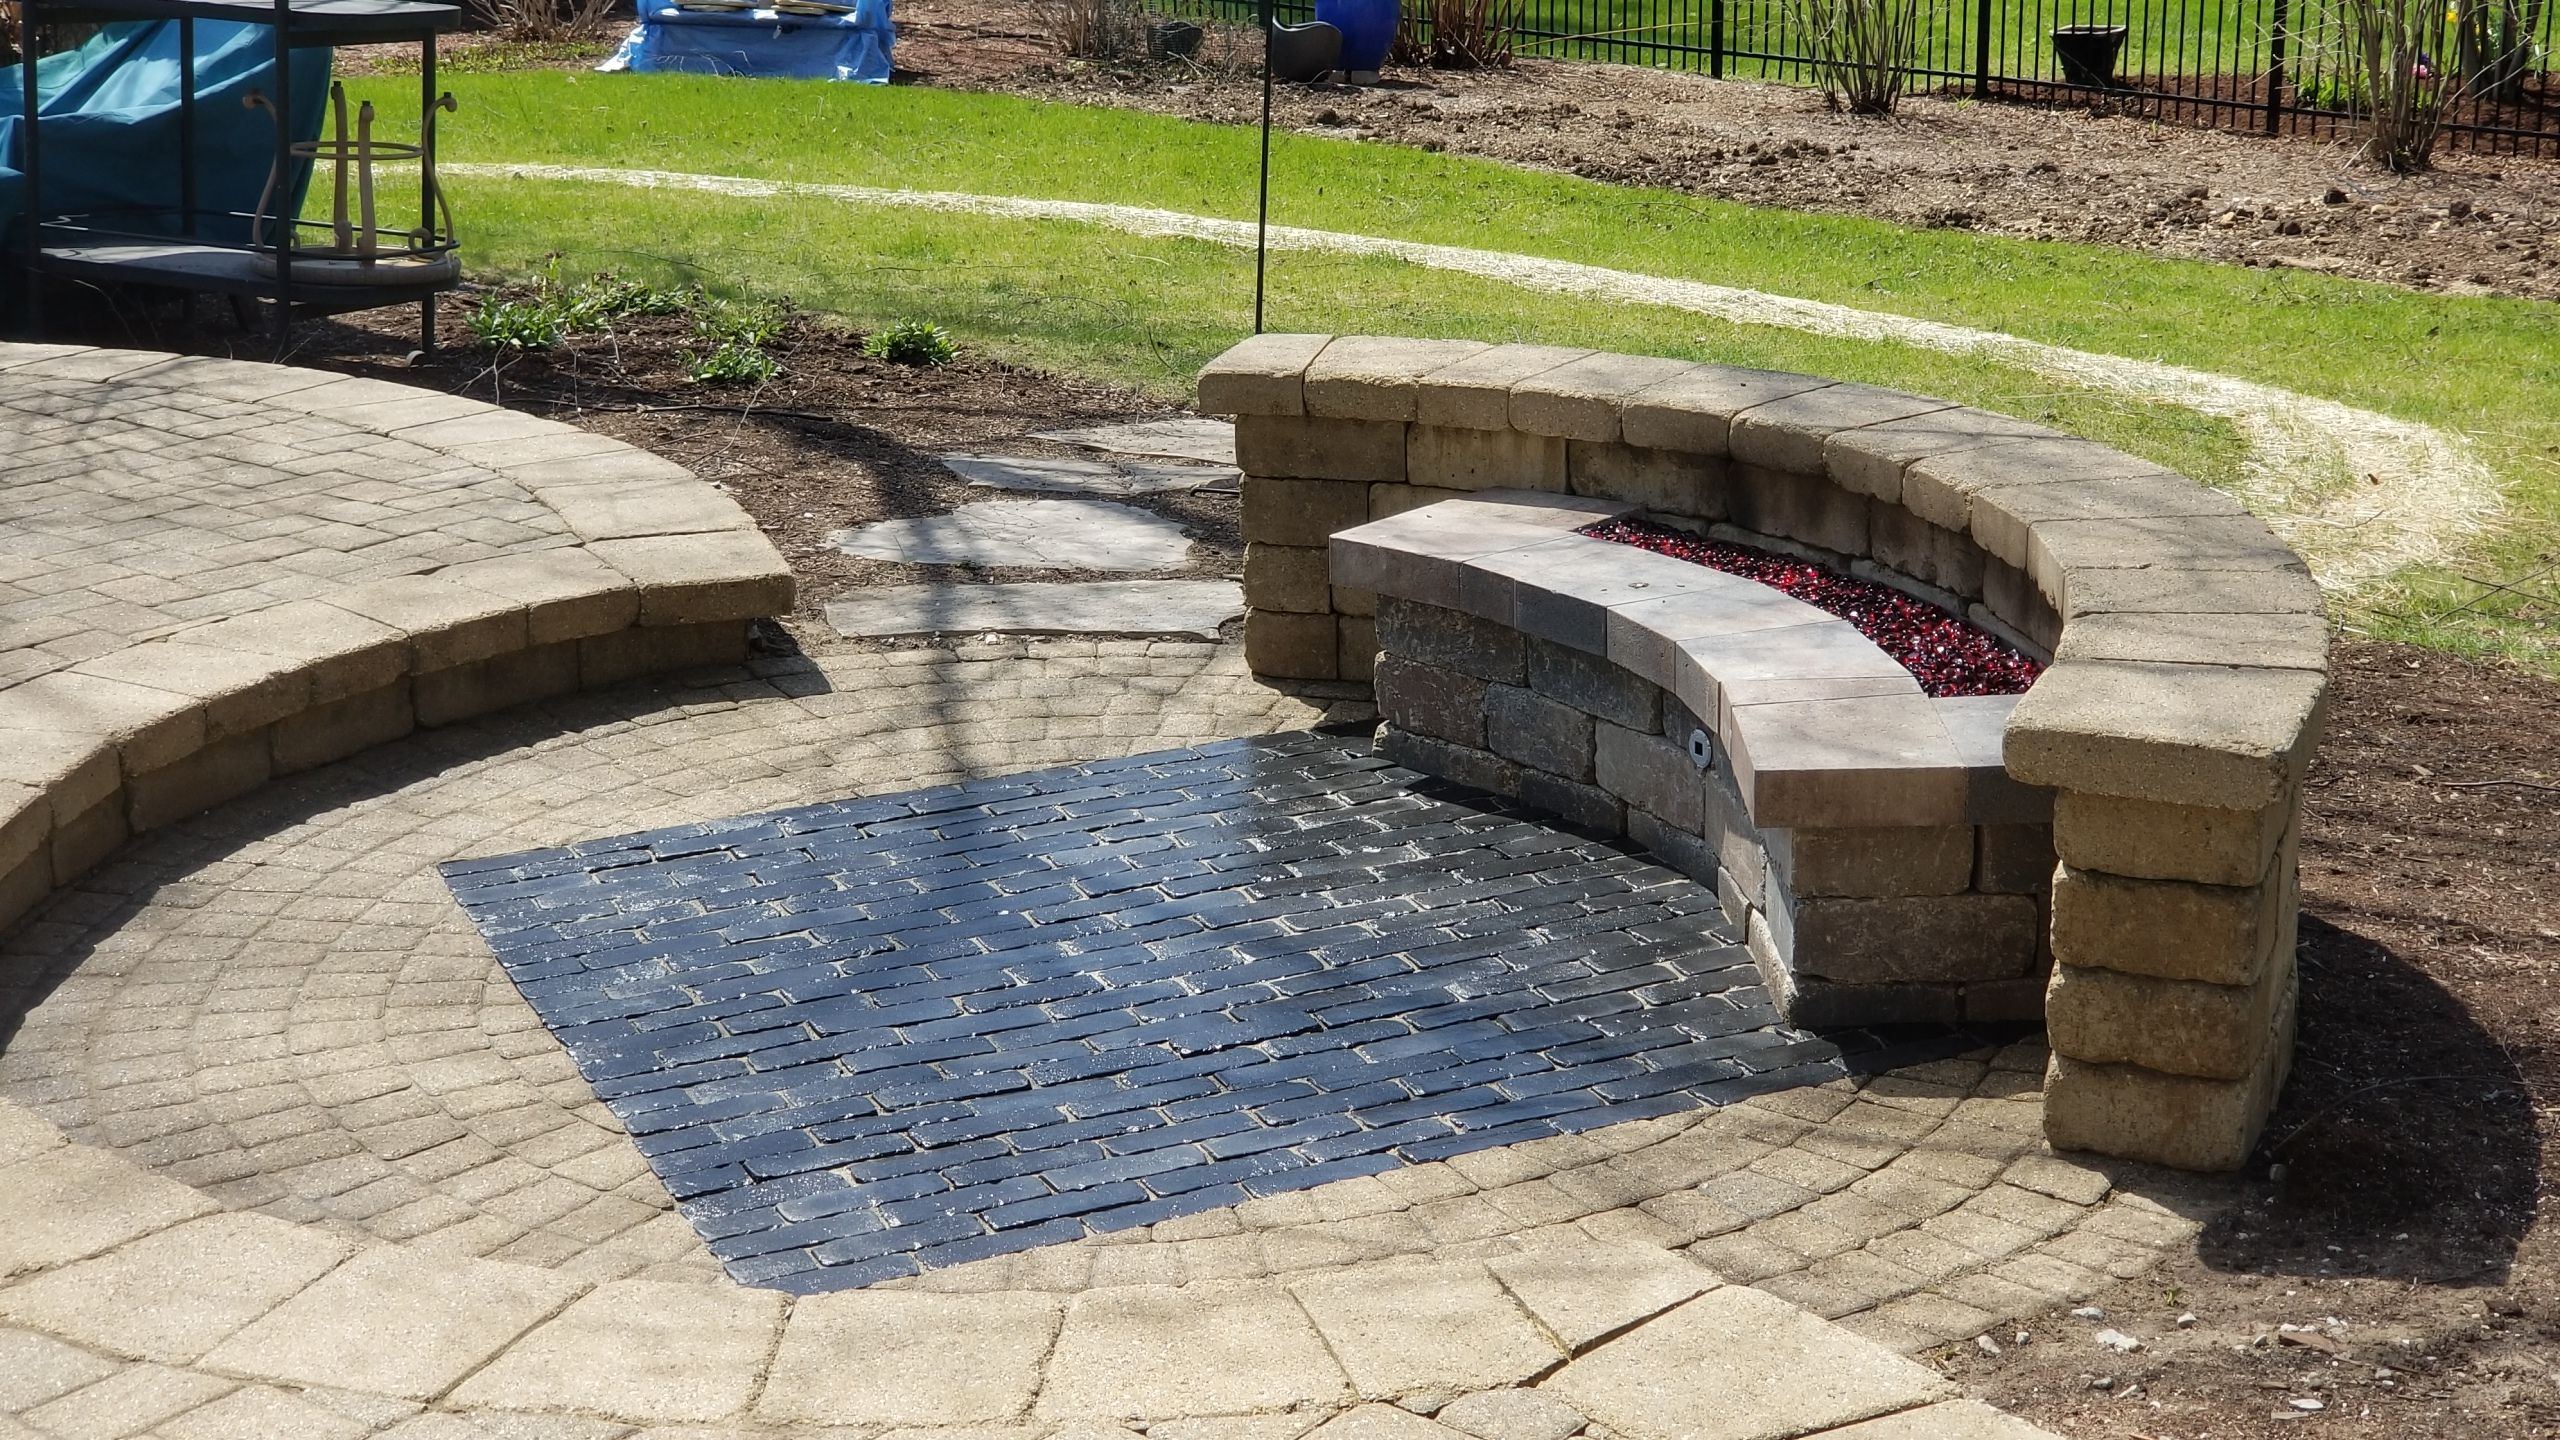 Landscaping for Daybreaker Landscapes in McHenry County, Illinois